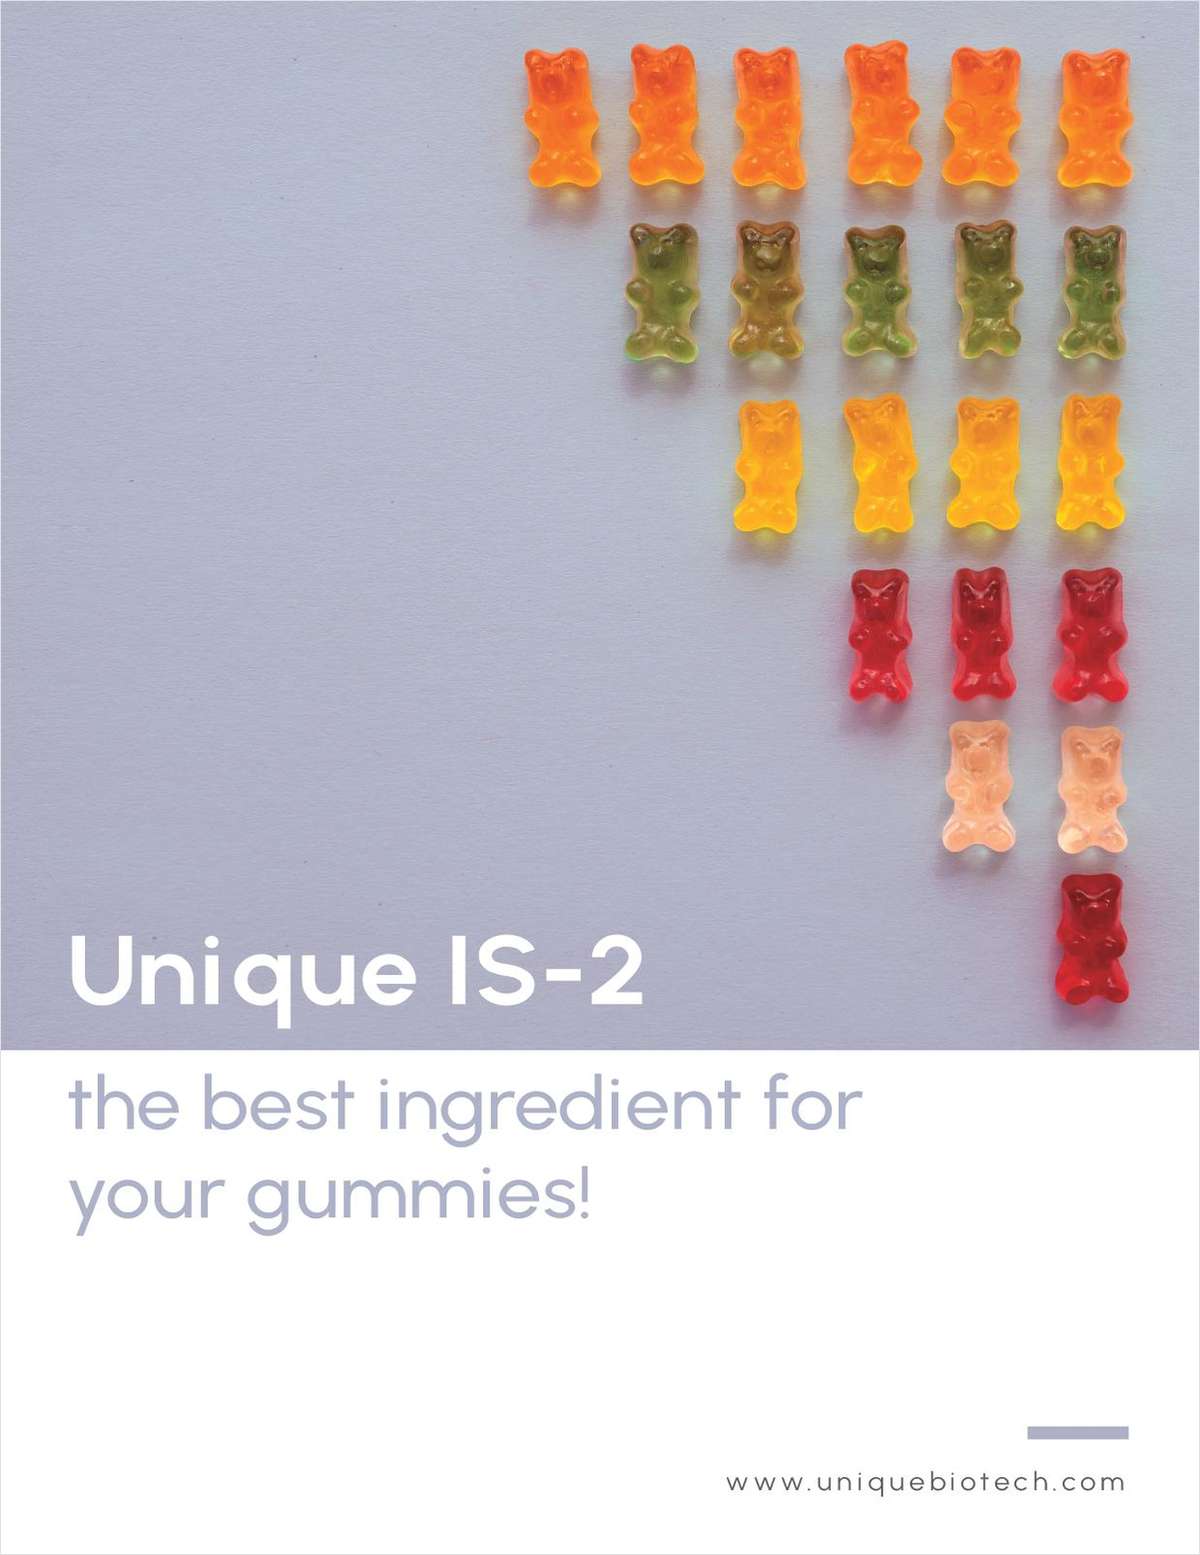 Unique IS2, the best ingredient for your gummies!